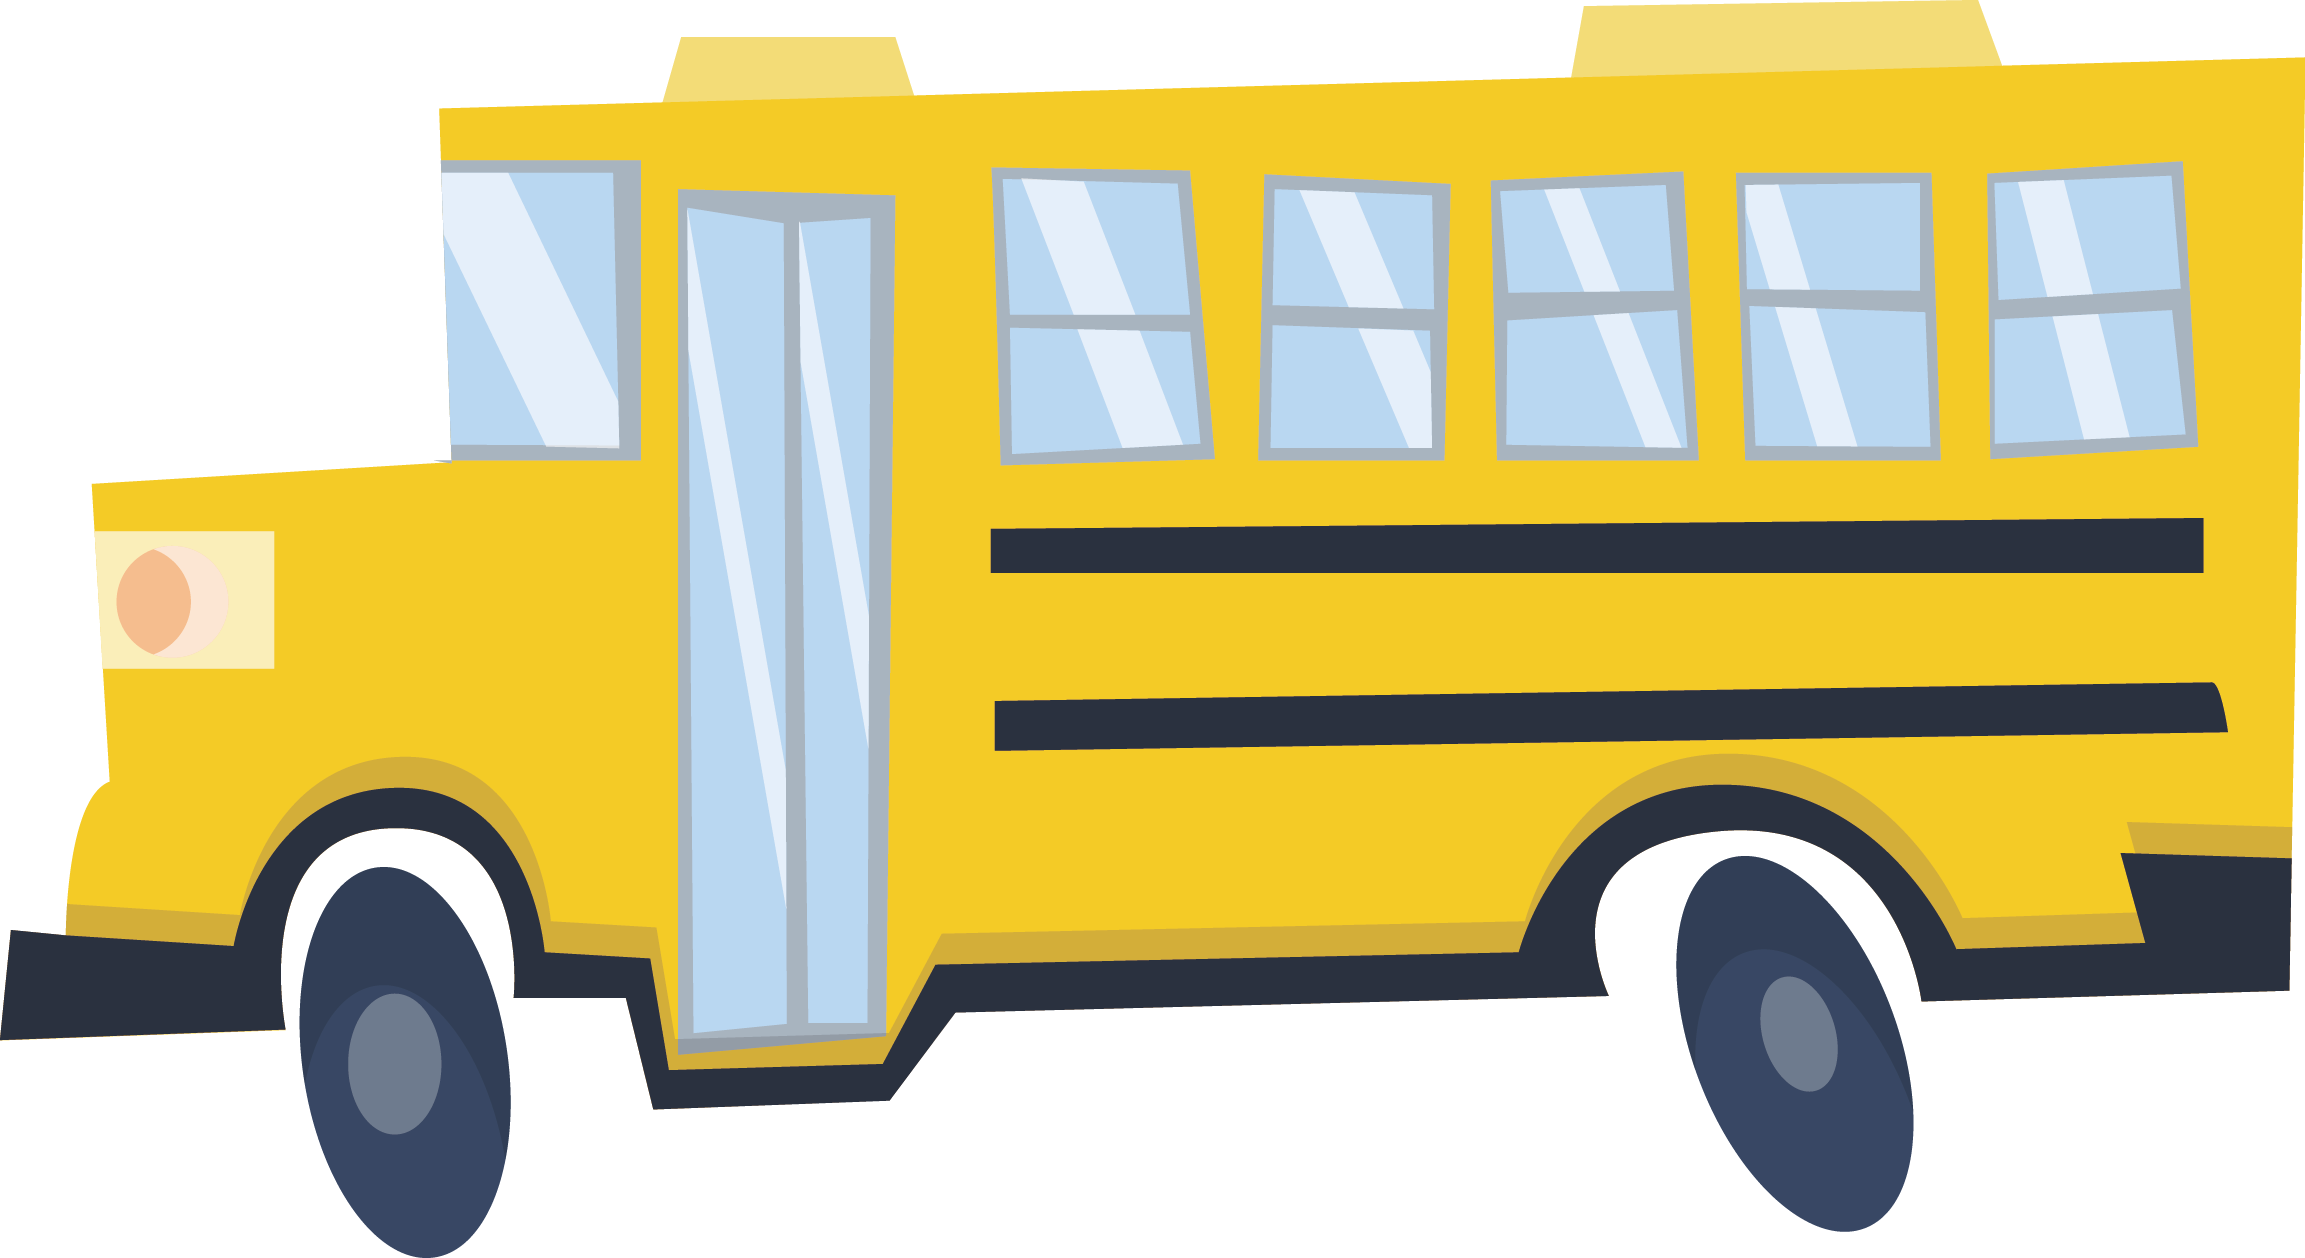 Bus Illustration PNG Pic Background